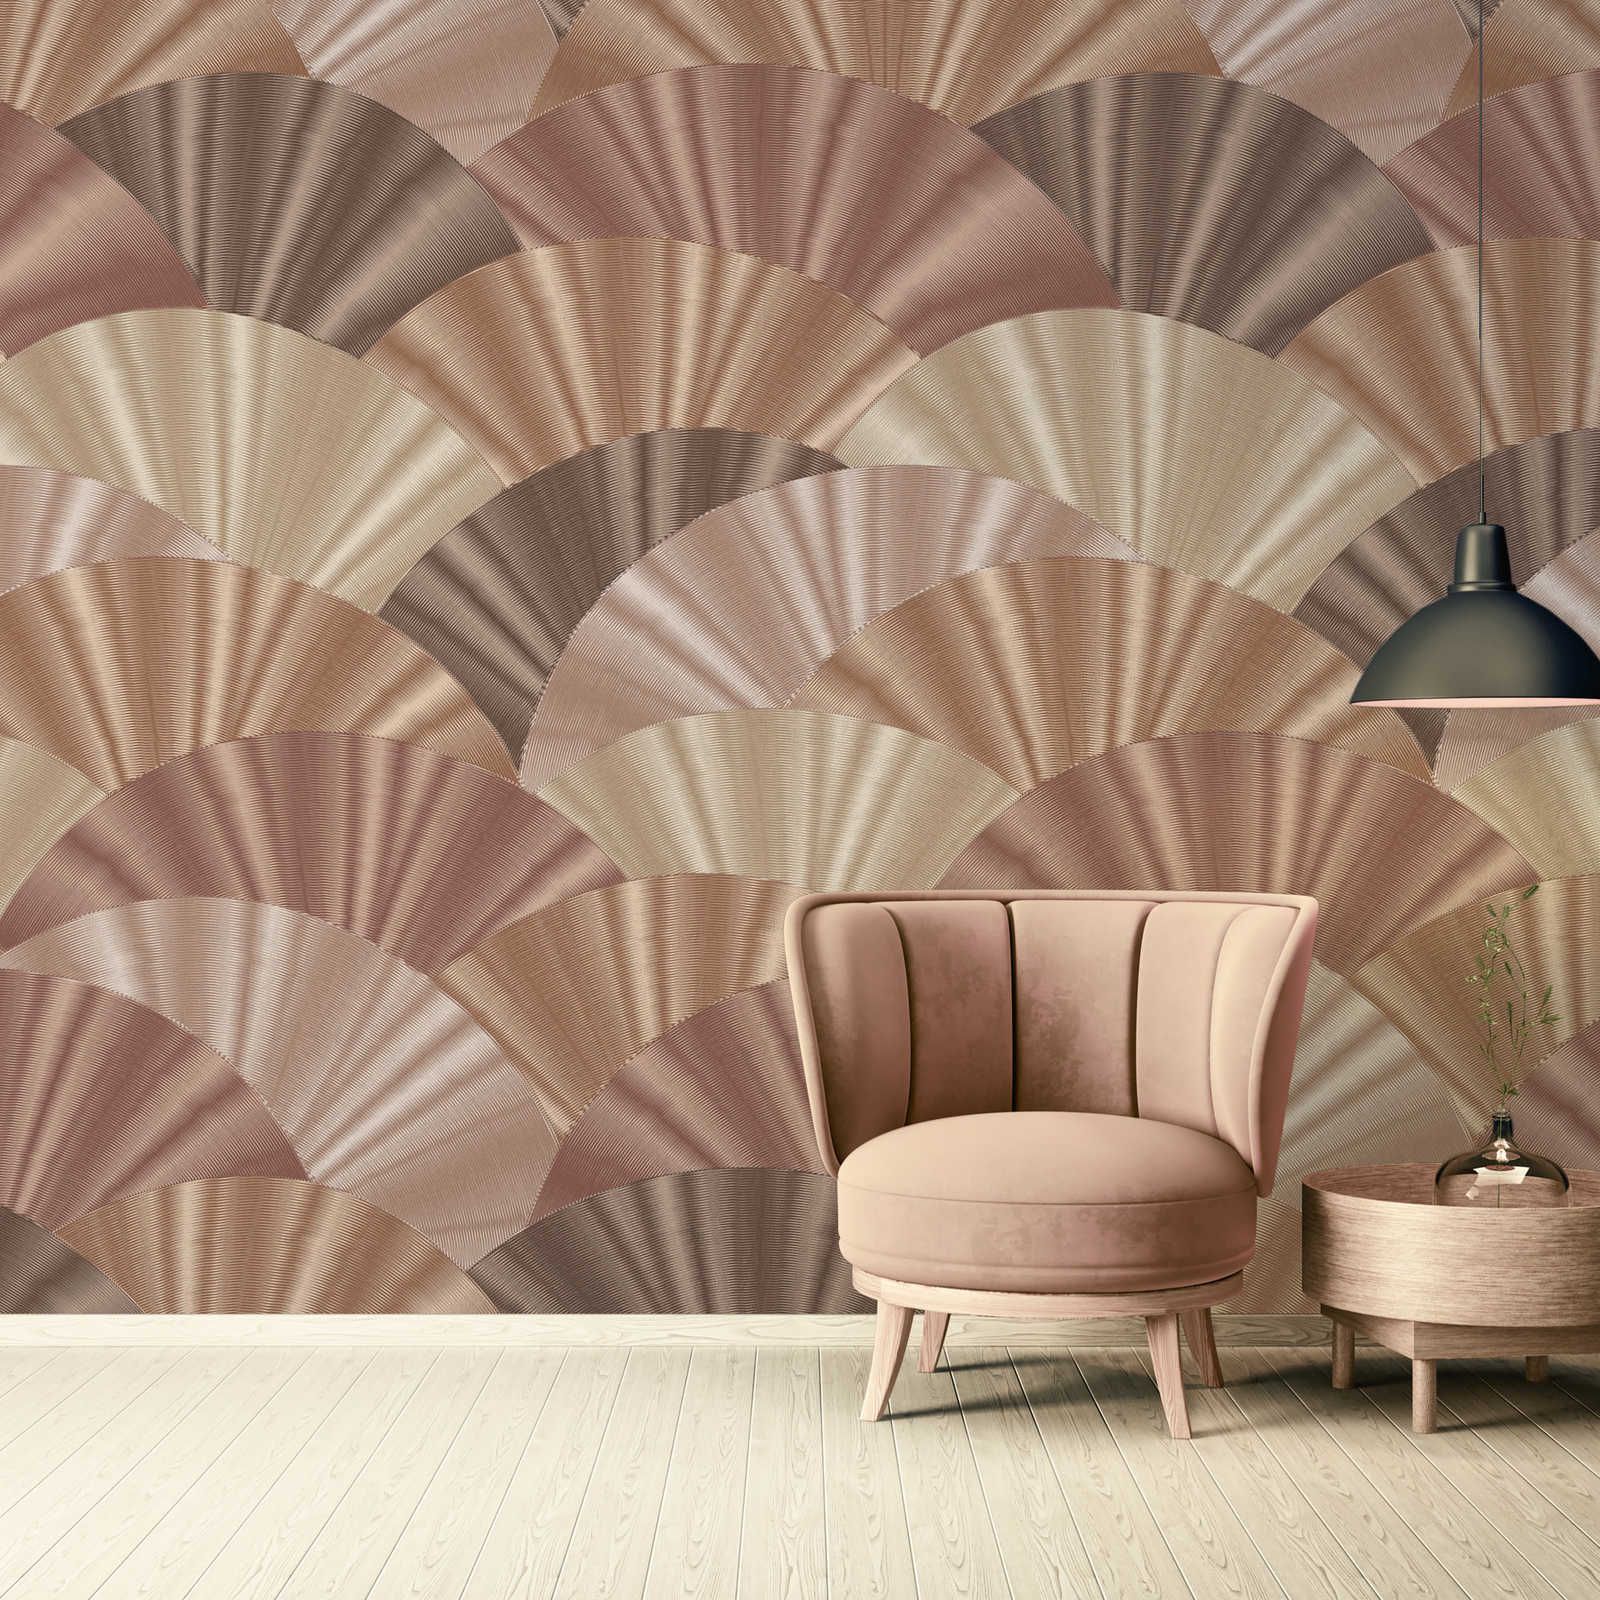 Non-woven wallpaper with fan pattern in soft shades - pink, cream, beige
